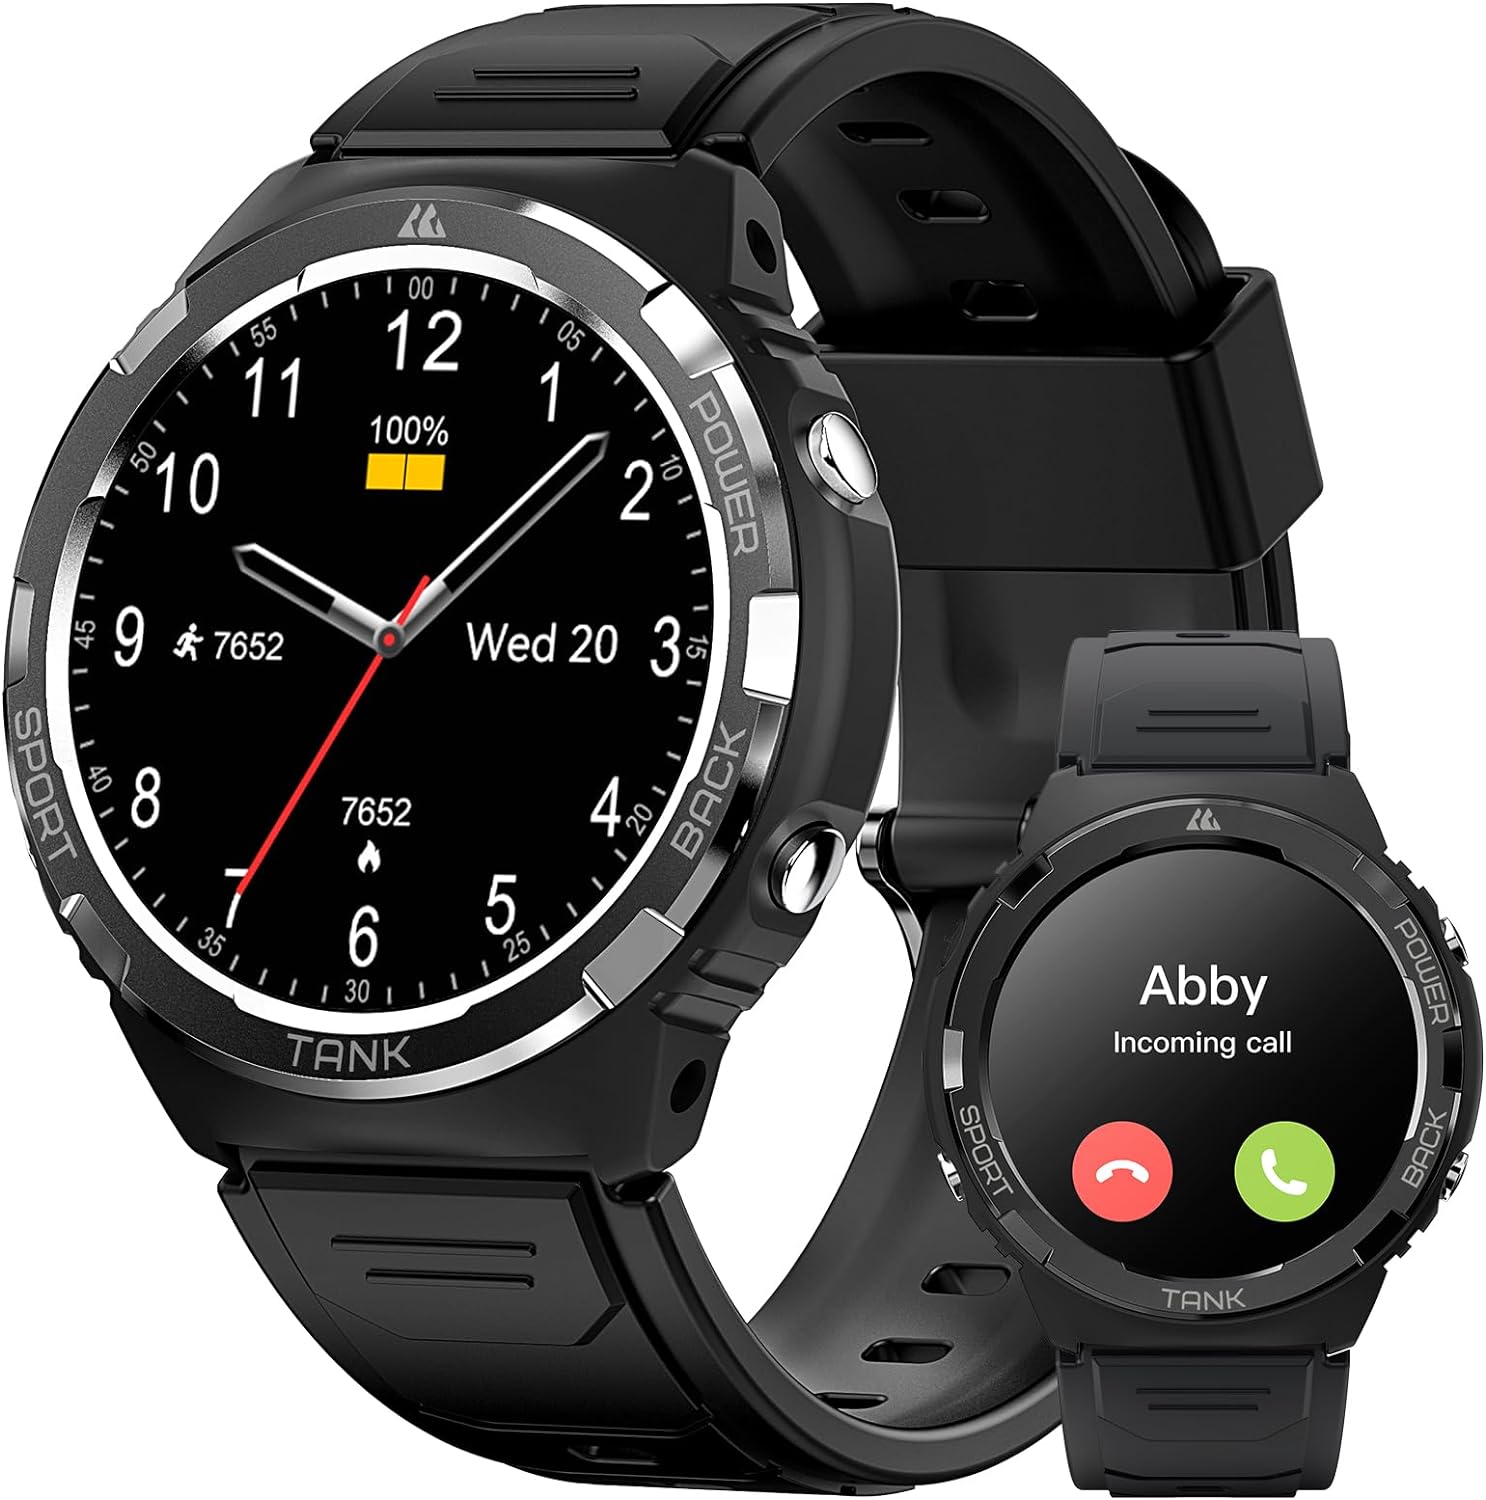 KOSPET Smart Watch Review: Experience Impressive Features of the S1 Model